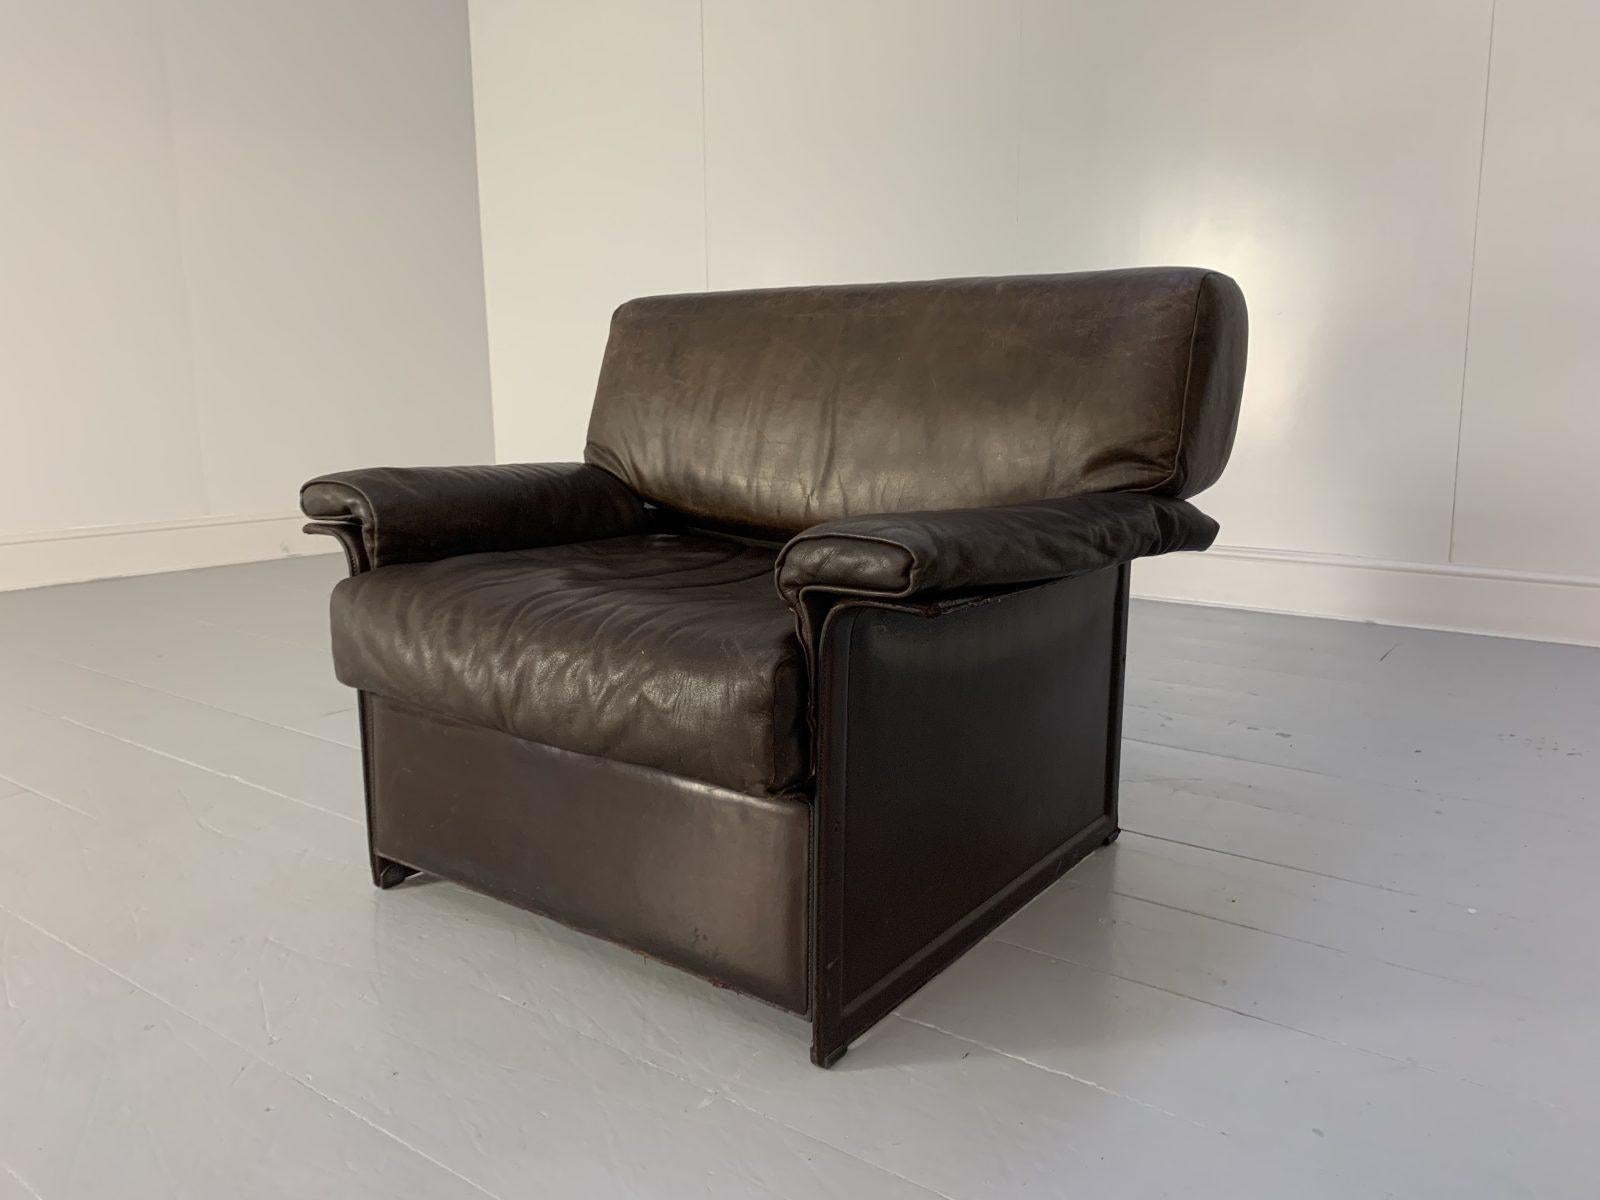 Pair of Matteo Grassi “Tm” Armchairs – in Vintage Brown Leather For Sale 11